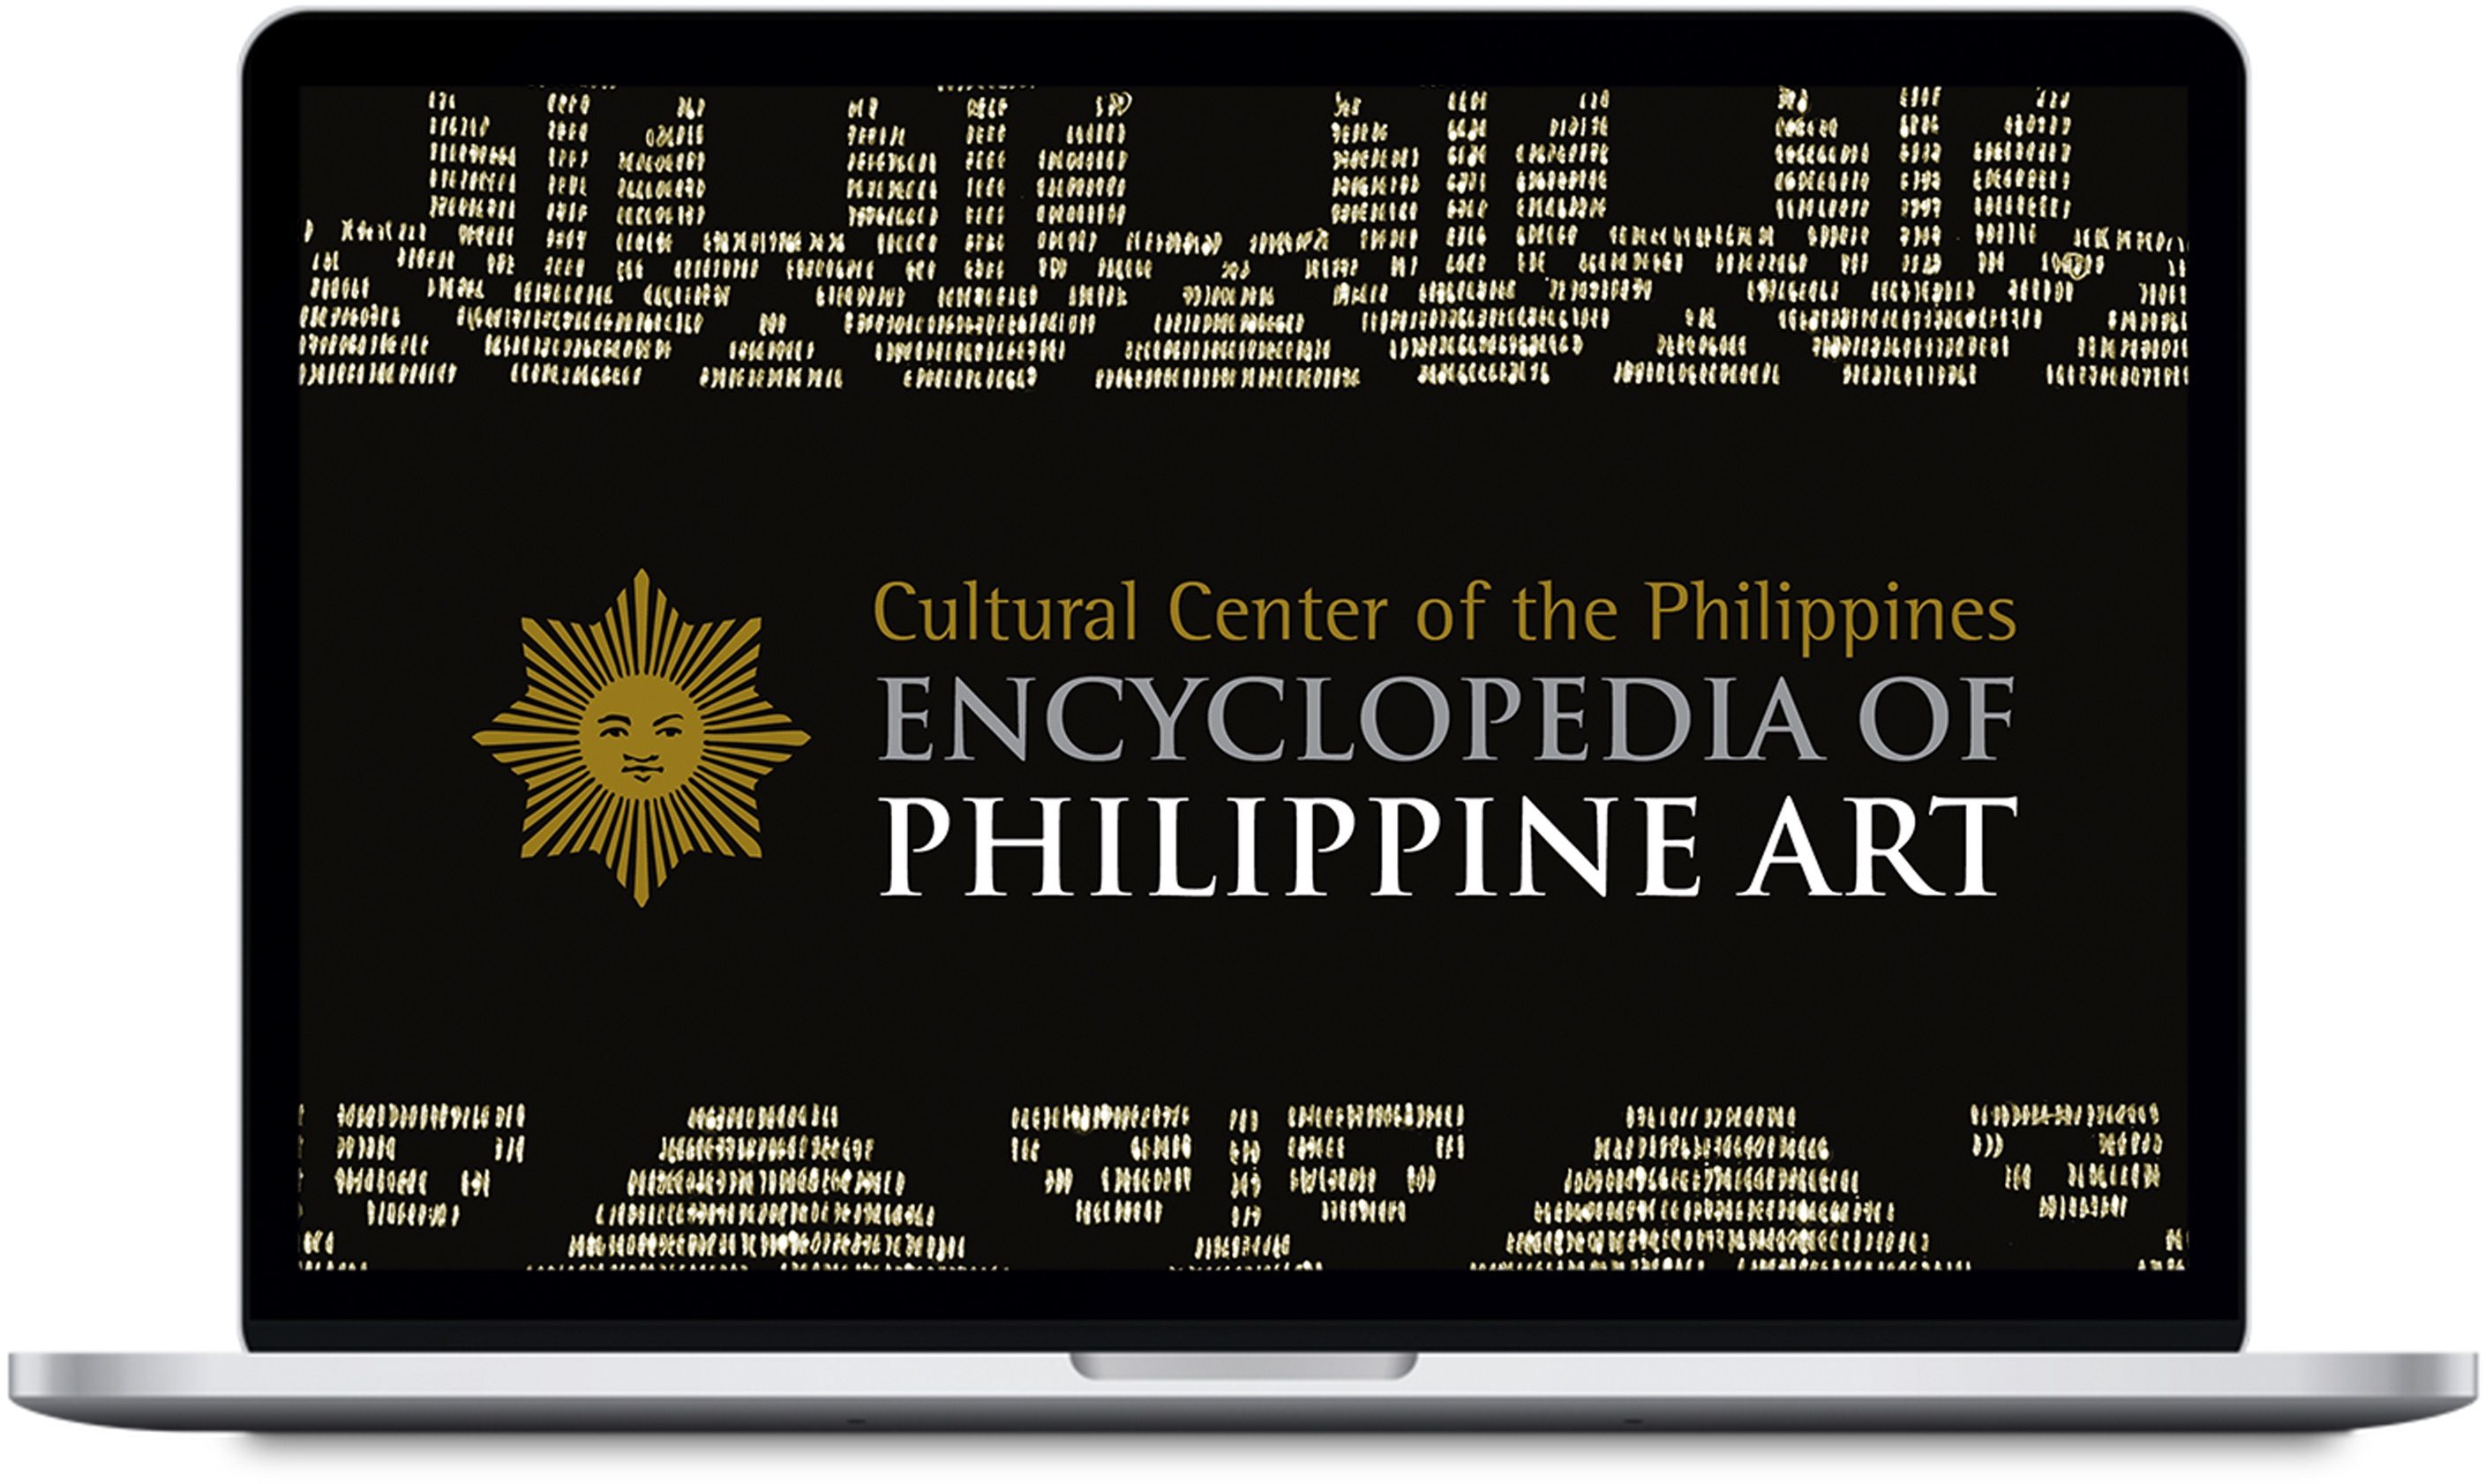 A one-stop resource on Philippine arts and culture is finally online